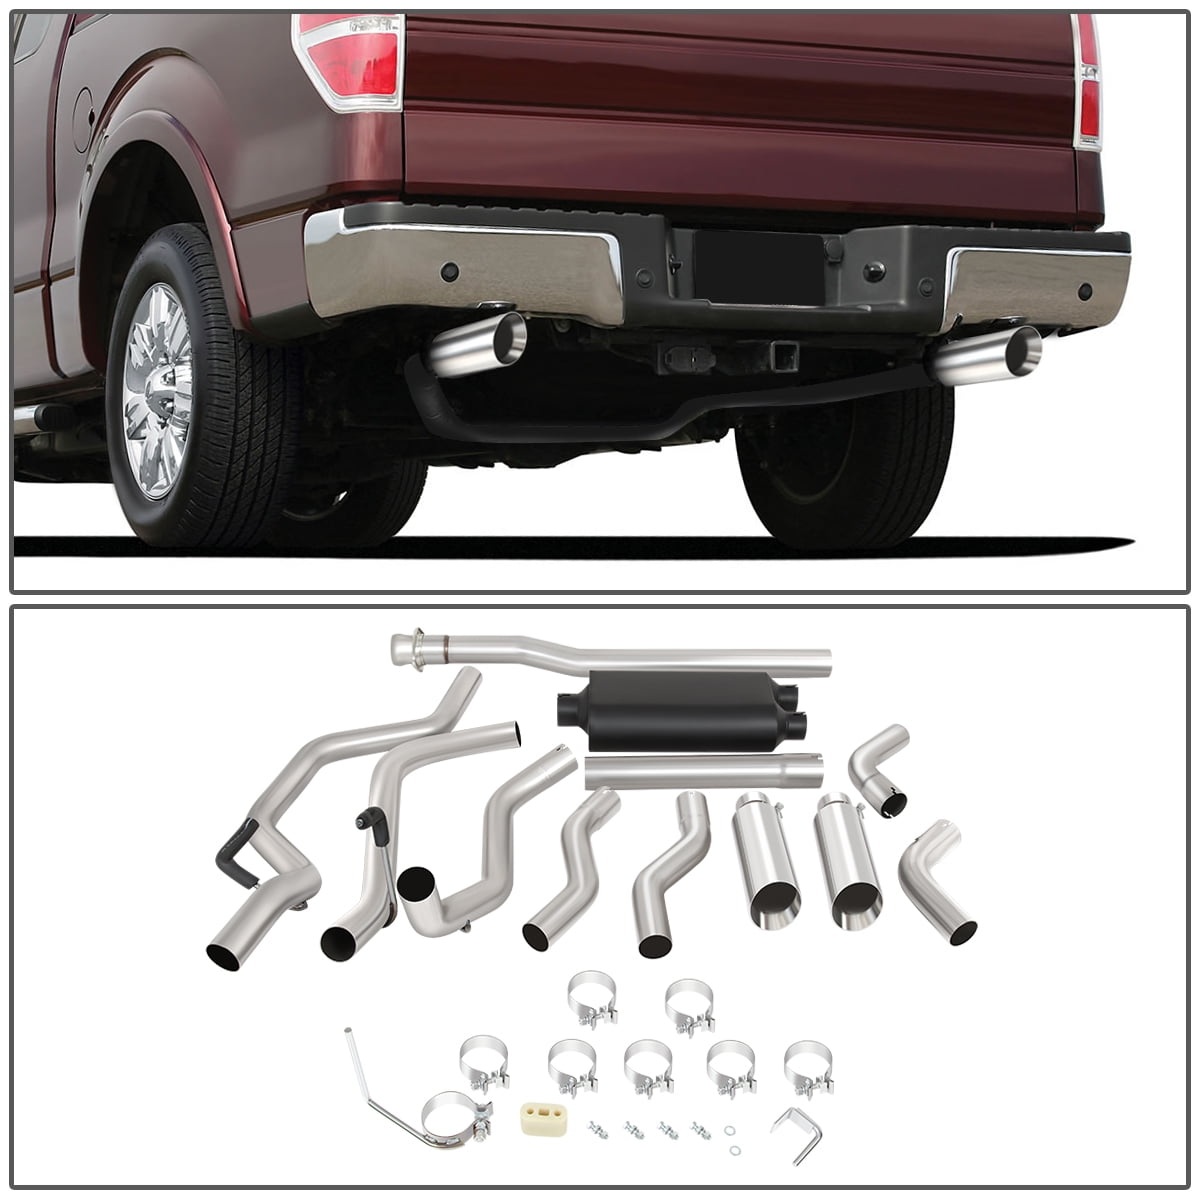 5.0L & 5.4L V8 Pickup Truck Cat Back Exhaust Muffler System With Performance Muffler & Polished Tip For 2009-2014 Ford F150 4.6L 